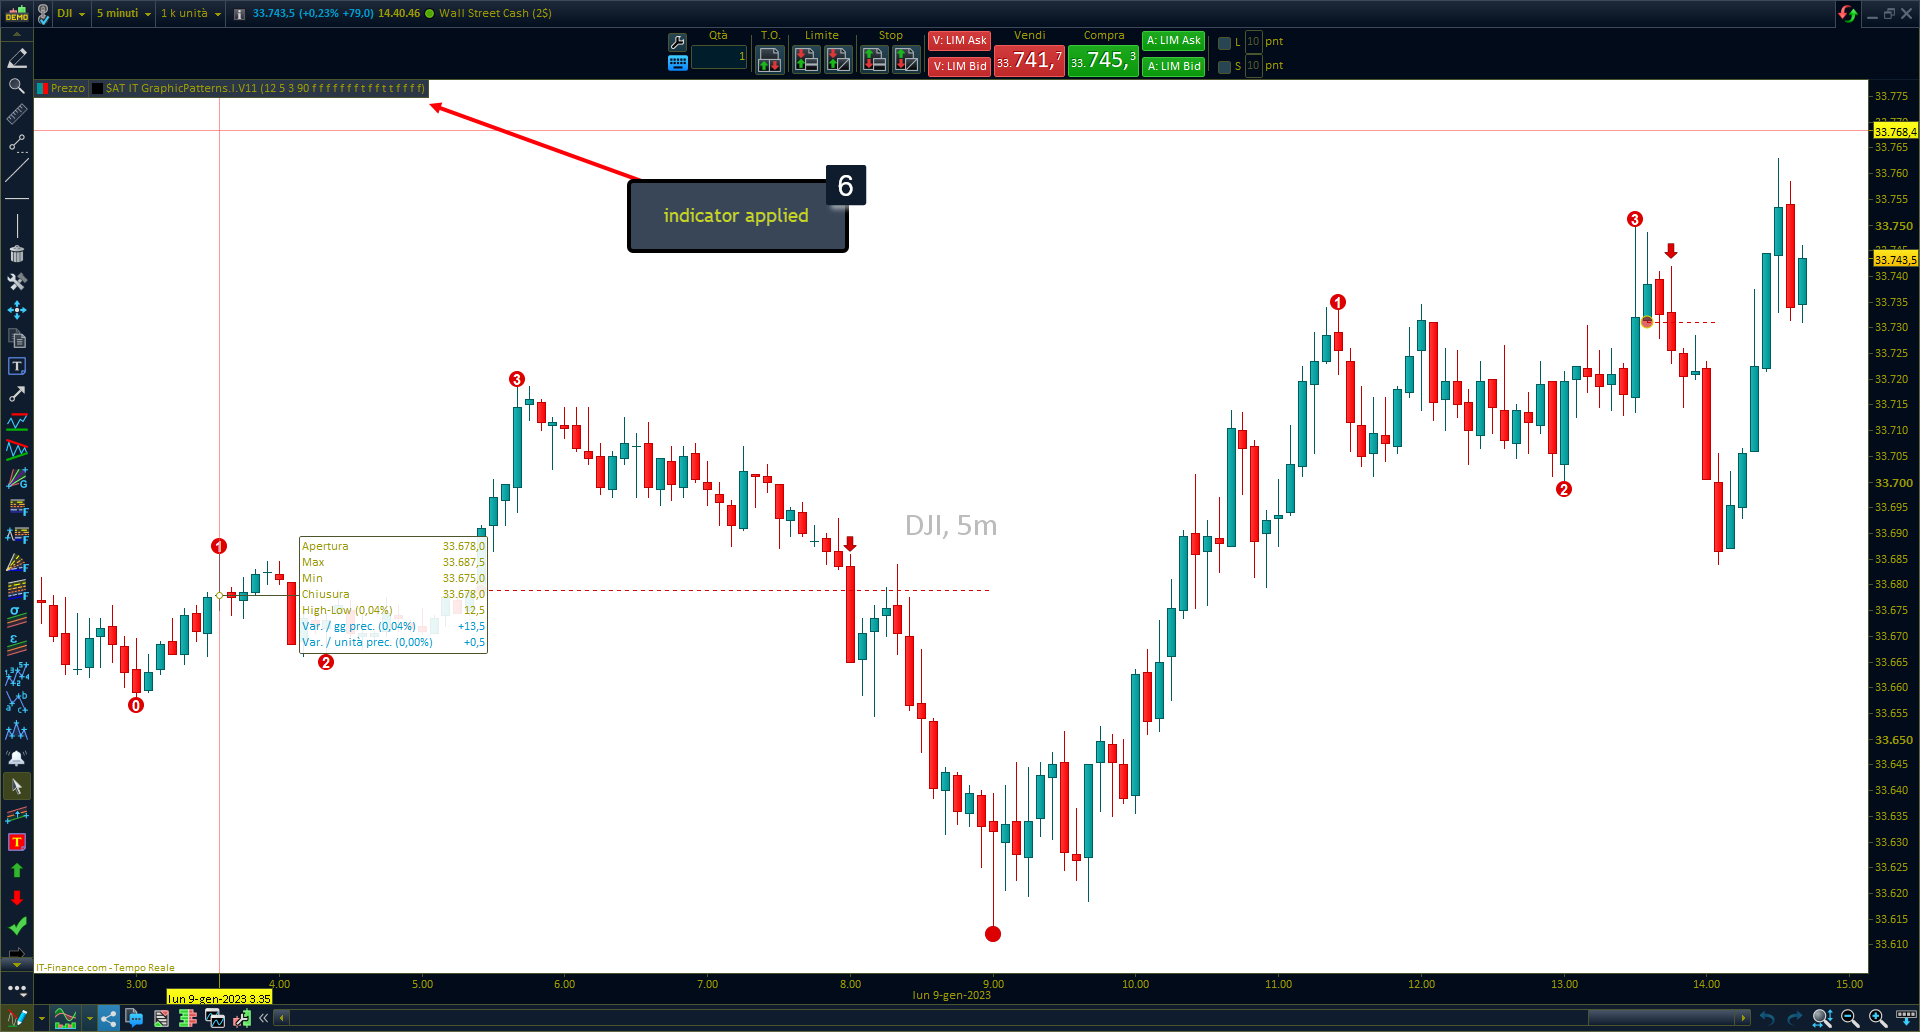 HOW TO ADD INDICATOR ON PRICE CHART PROREALTIME